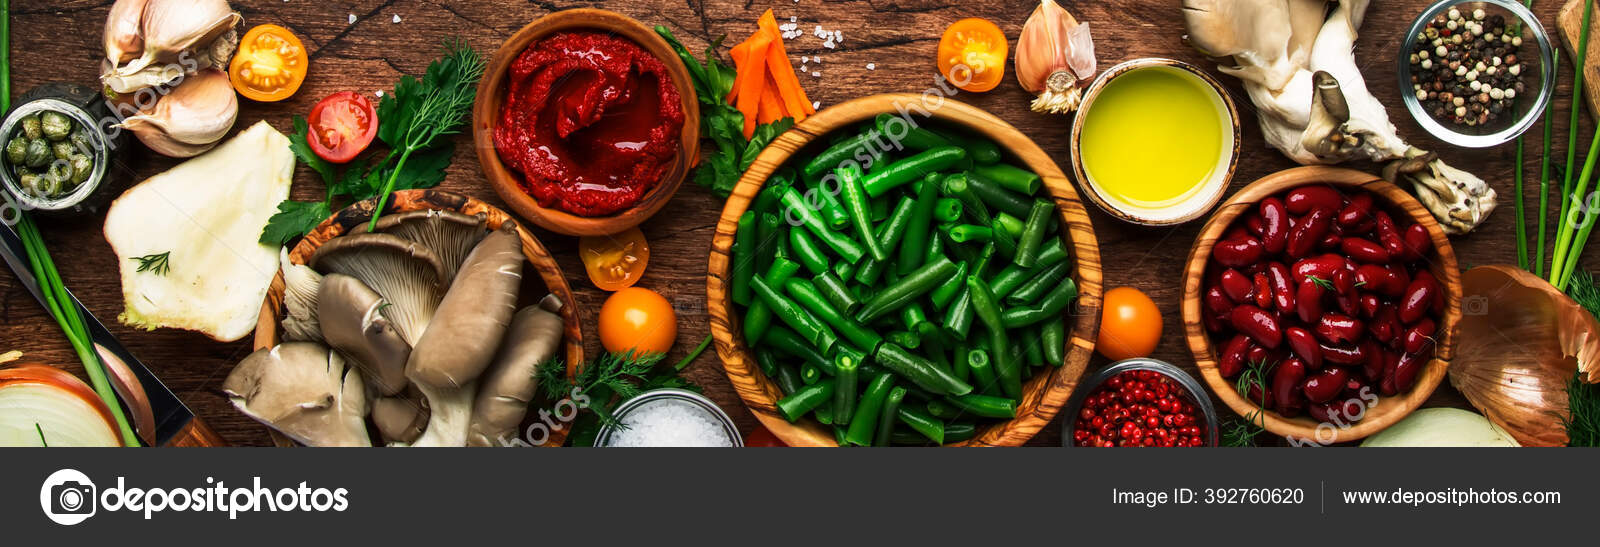 Food Cooking Background Ingredients Preparation Vegan Dishes Green Bean  Vegetables Stock Photo by ©5PH 392760620